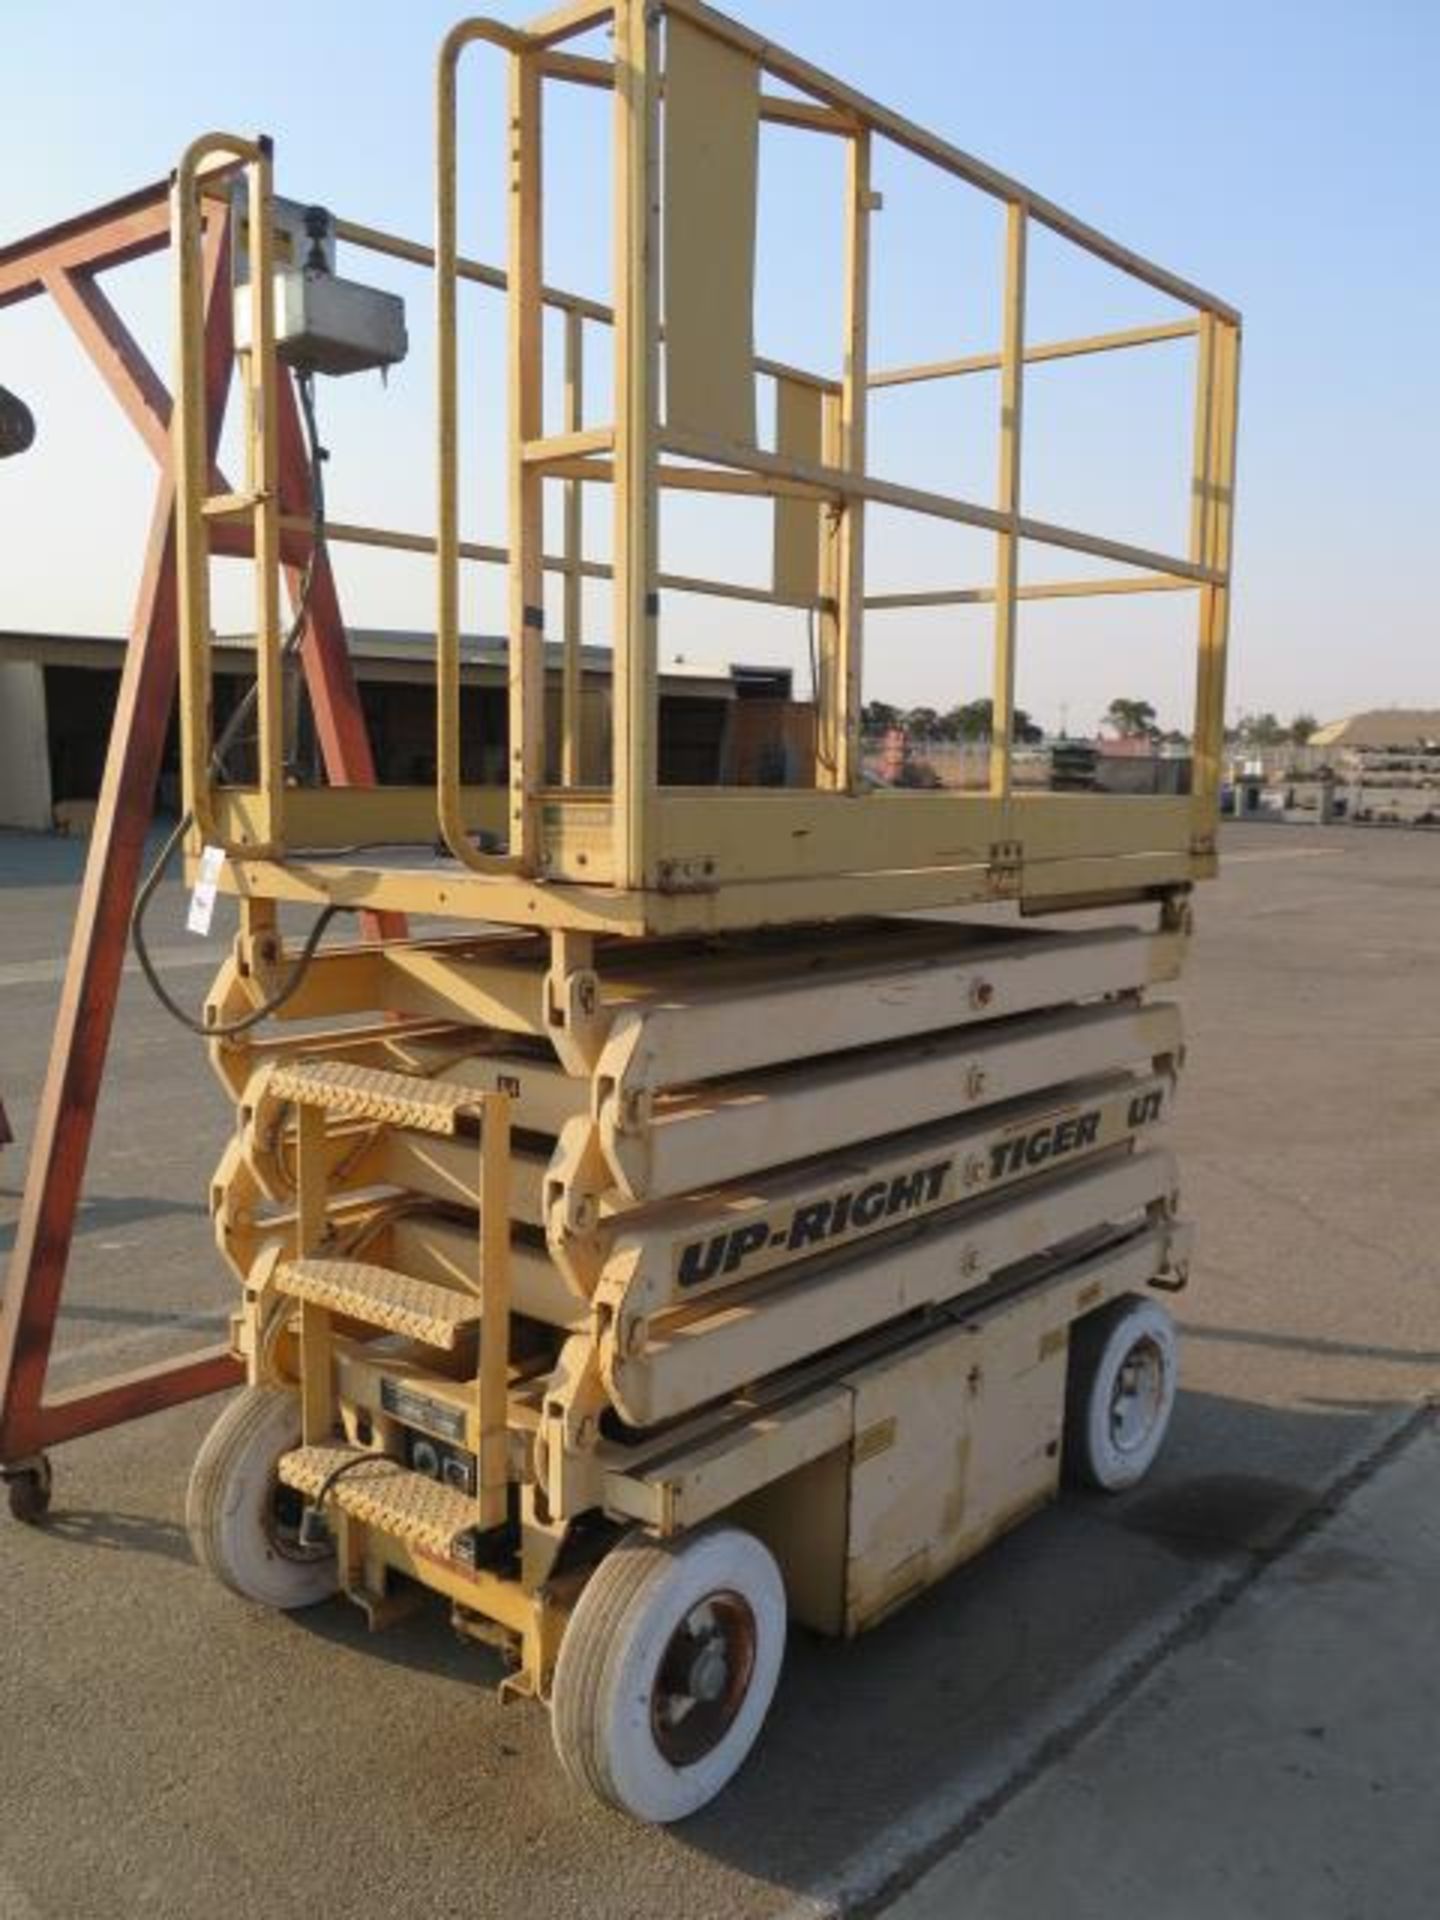 Up-Right Tiger Electric Scissor Platform Lift (SOLD AS-IS - NO WARRANTY)